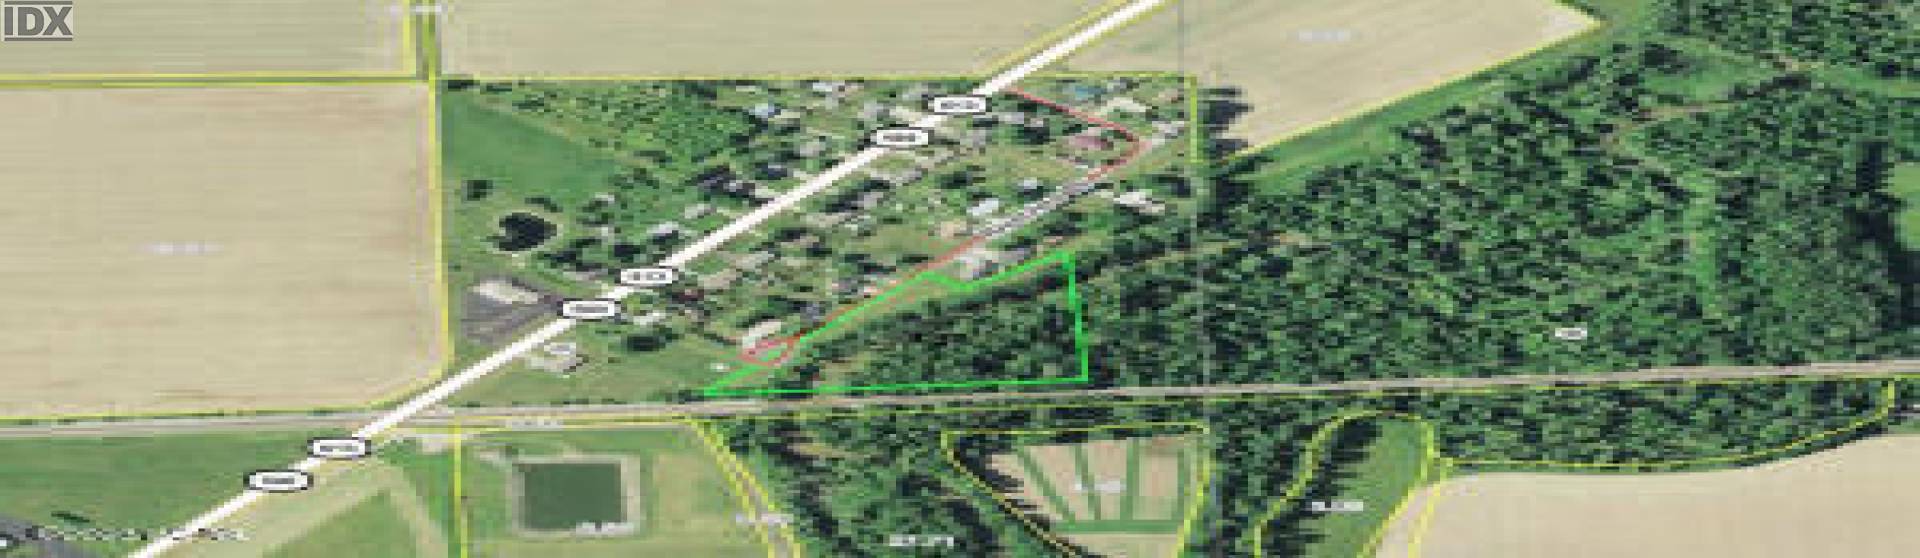 ref614_4.57 acres, Riverview Drive, Payn